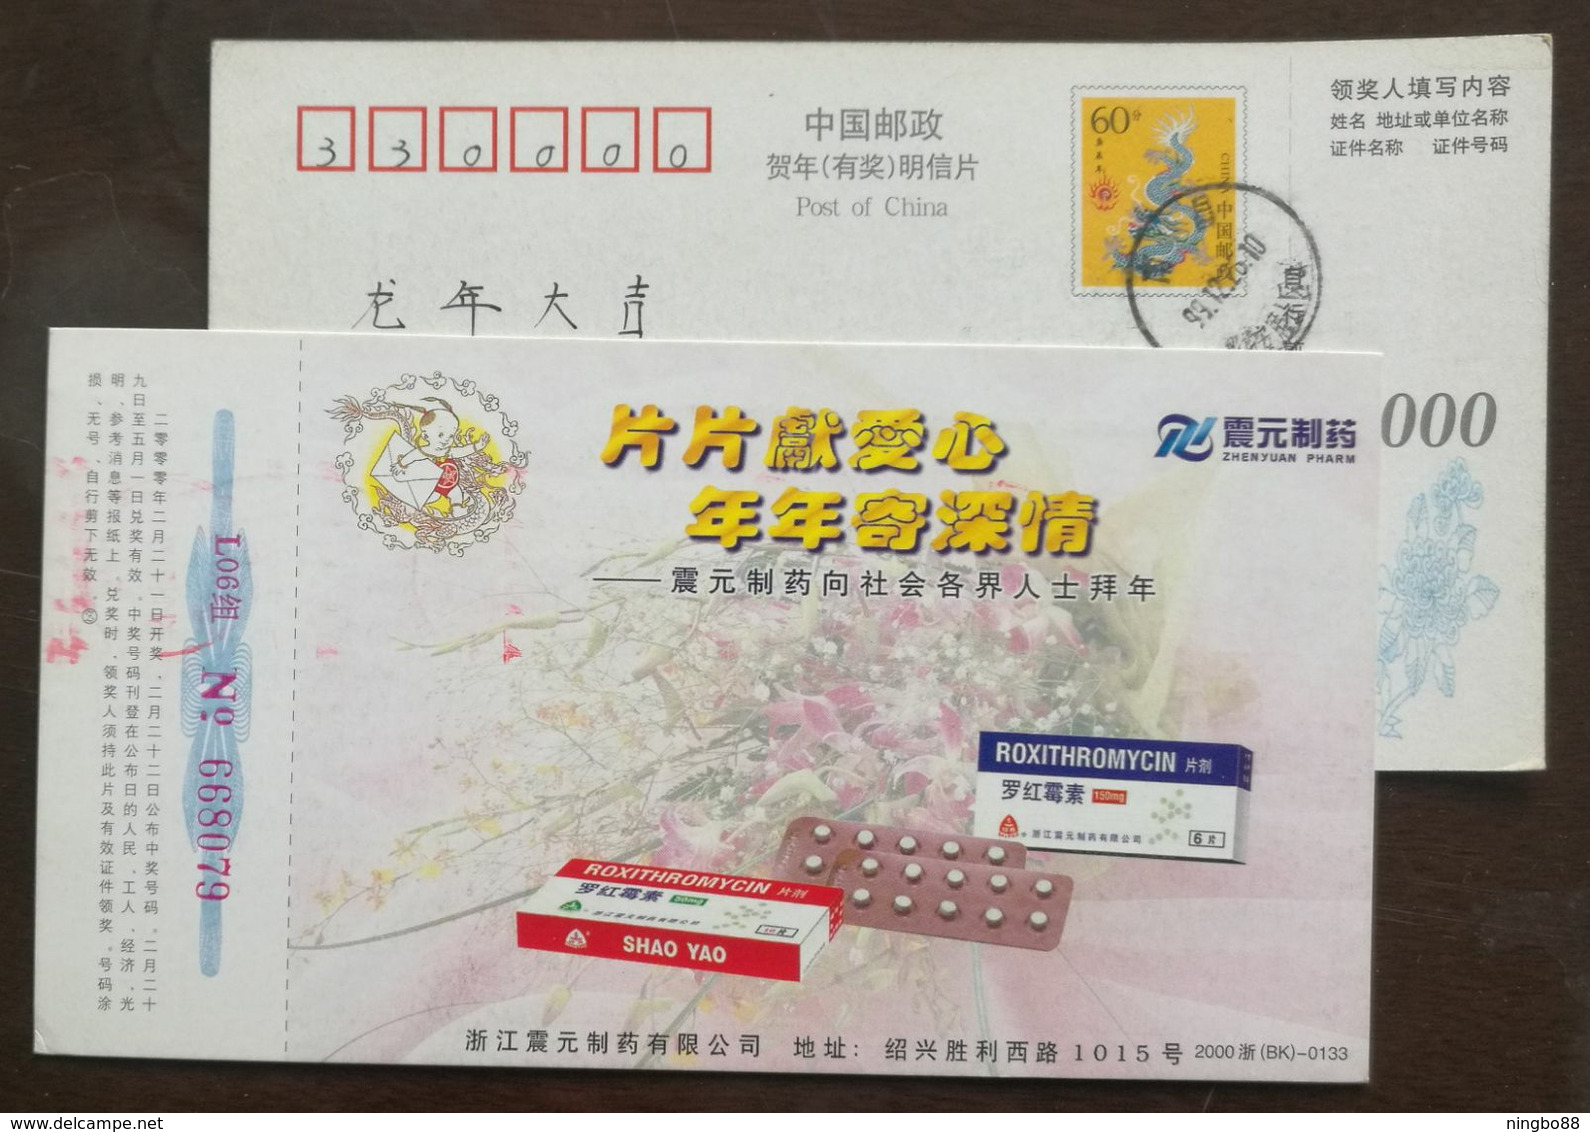 Roxithromycin Tablets,China 2000 Zhejiang Zhenyuan Pharmaceutical Factory Advertising Pre-stamped Card - Pharmacy